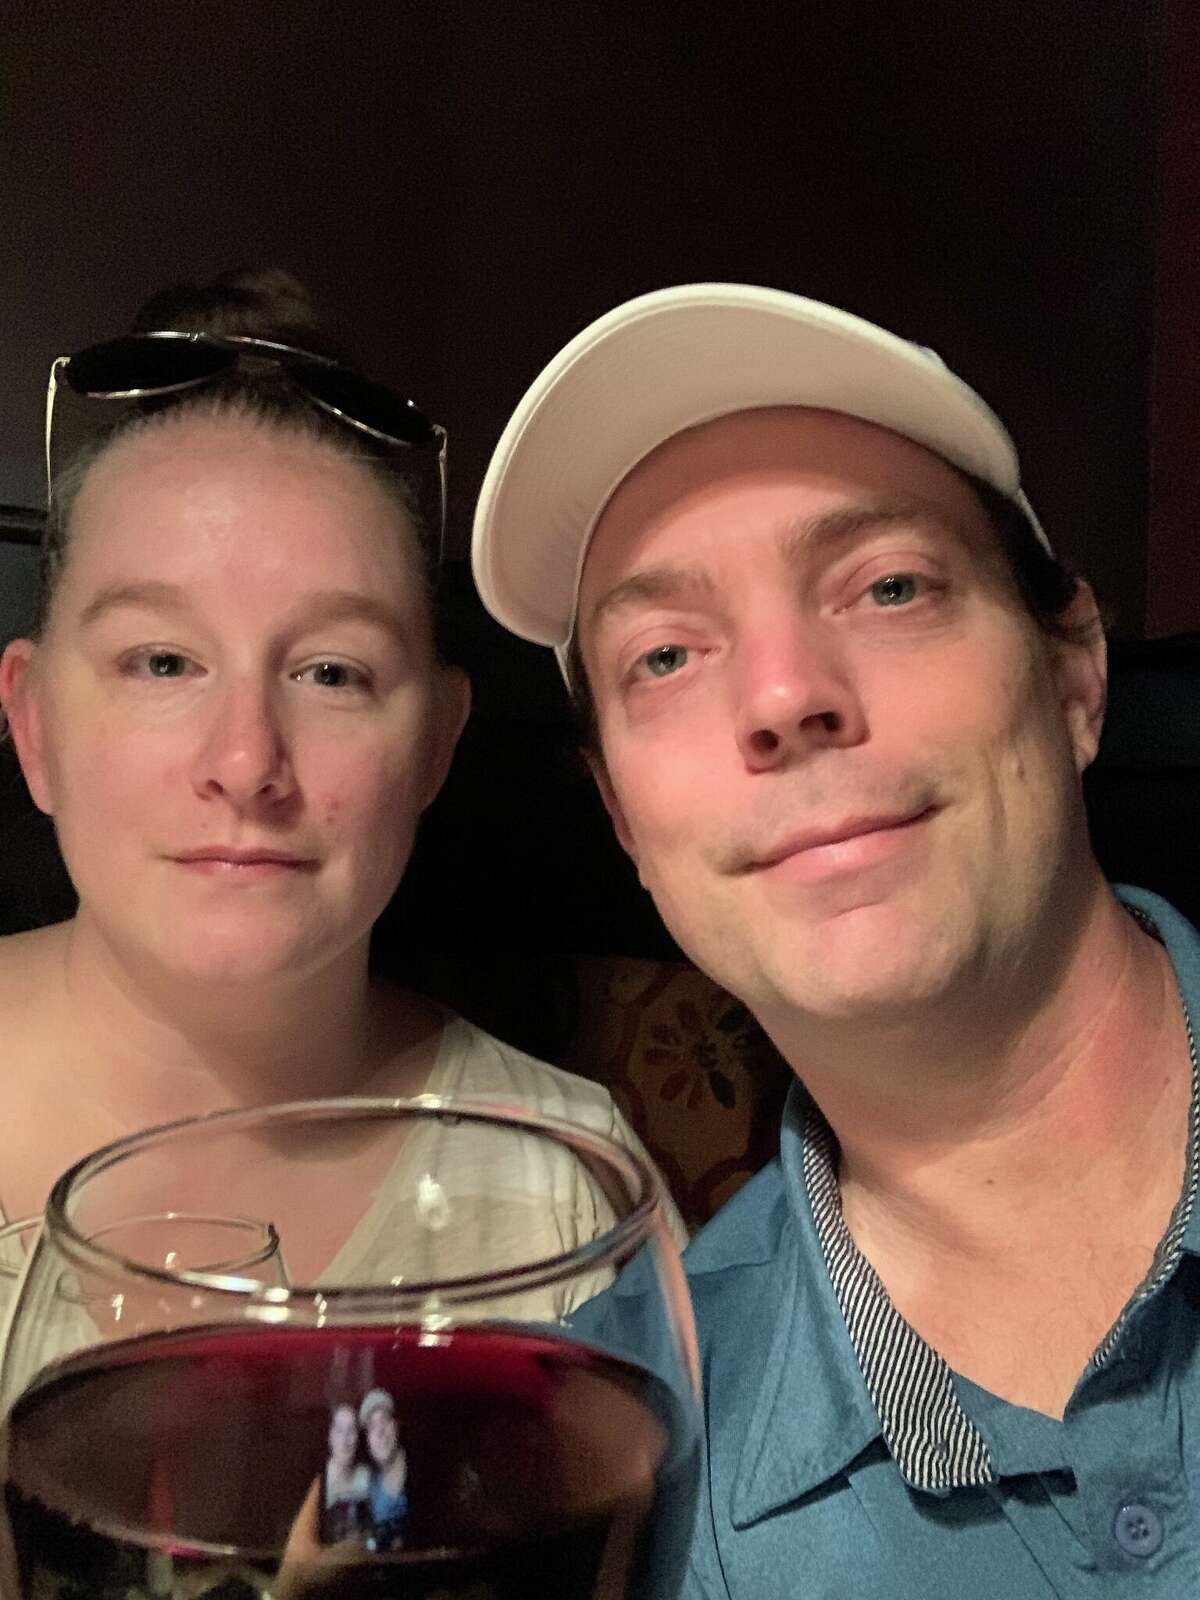 Krista and Brett Cotton also have a distinct division of duties, which helps them run their two businesses while maintaining a happy marriage. The duo own and operate Cotton Brewing Company and Rice and Barley Taphouse.